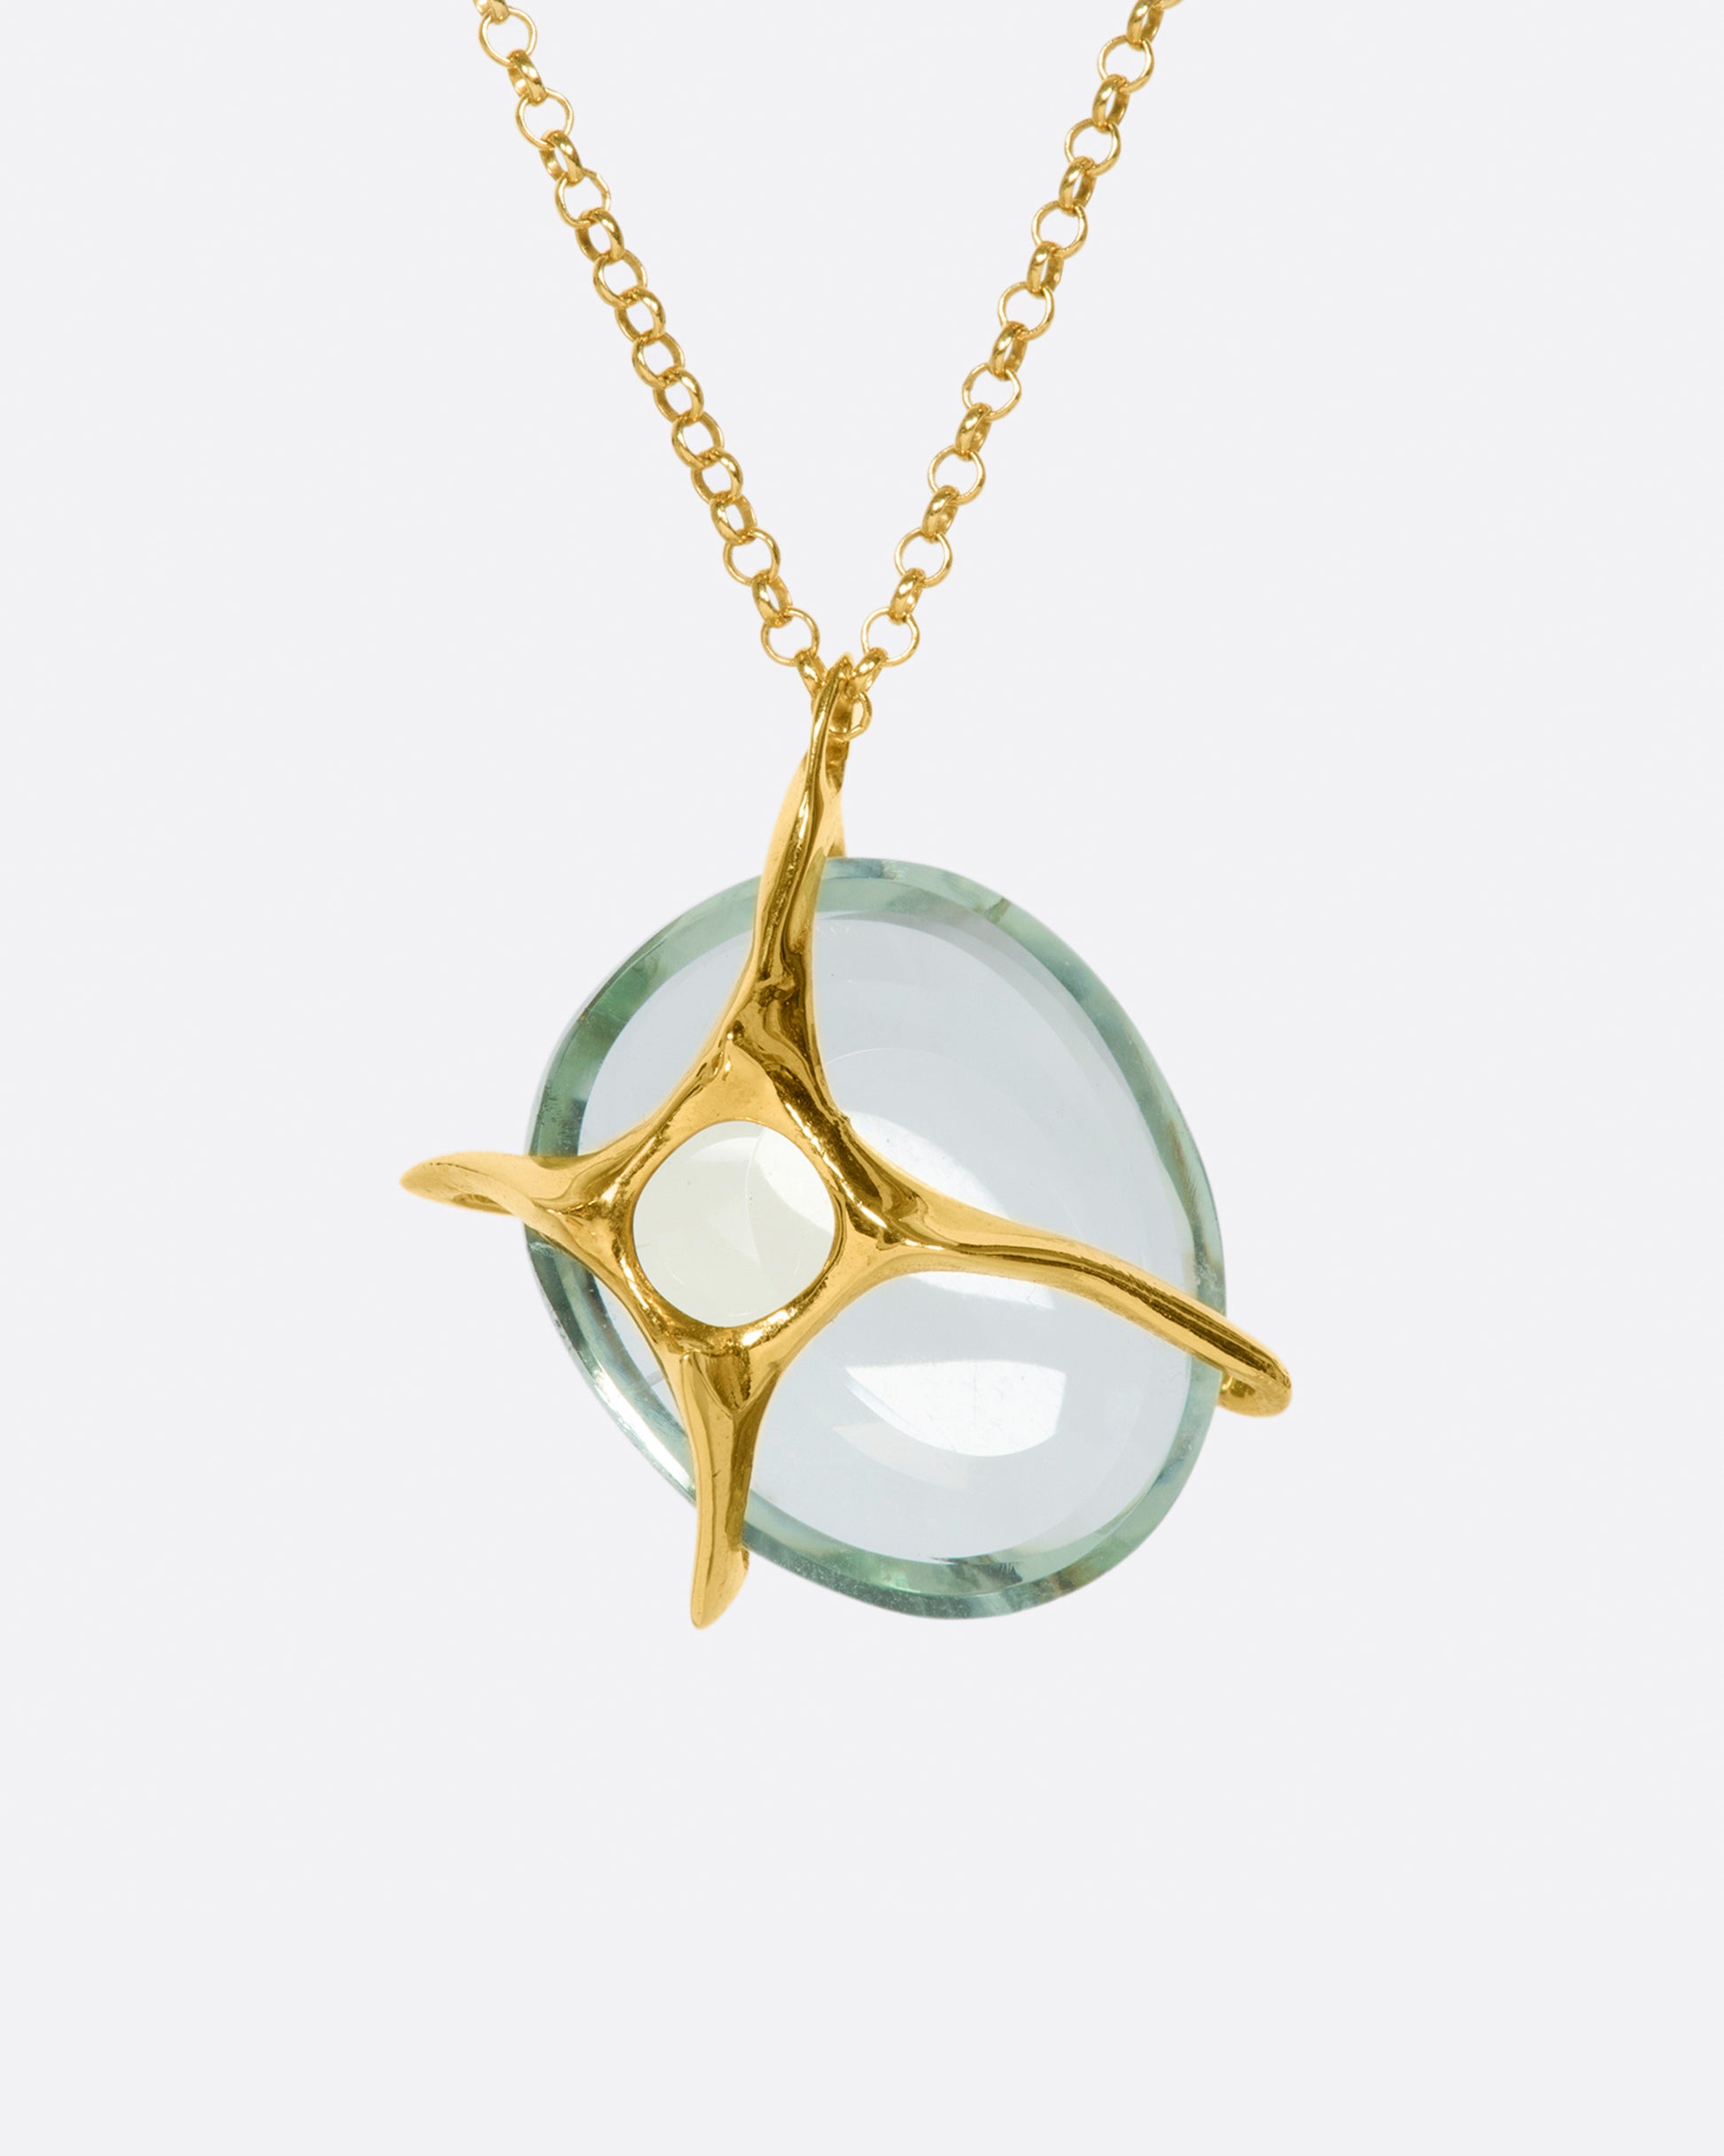 A yellow gold chain necklace with a large, round green quartz pendant set in large gold prongs.